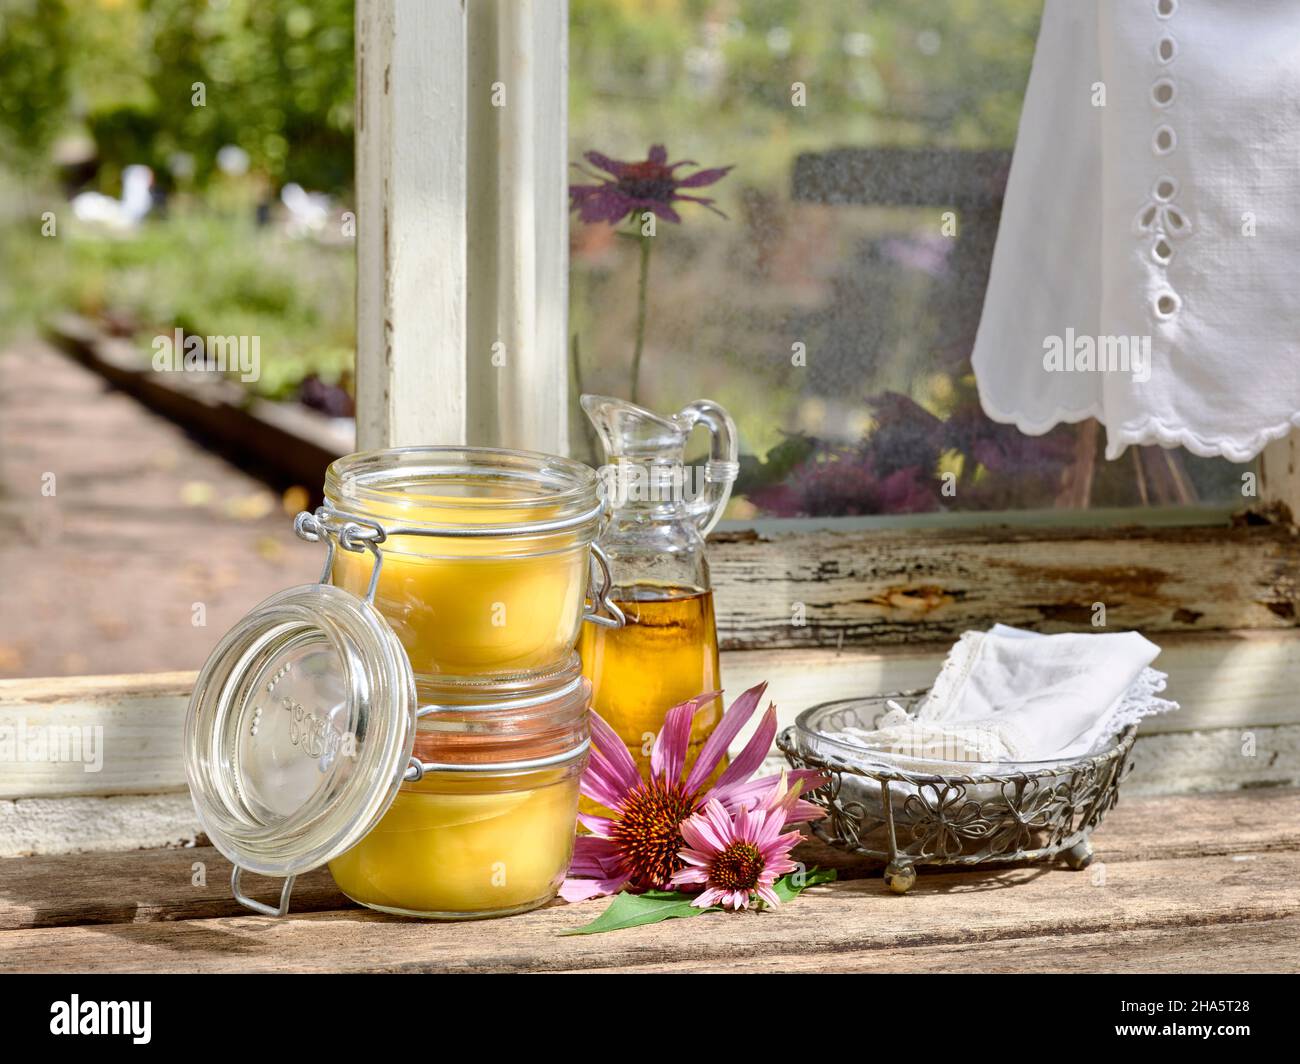 two storage jars filled with echinacea ointment and a glass carafe of vegetable oil stand together with a metal basket and textile handkerchiefs on a wooden table in front of a workshop window Stock Photo